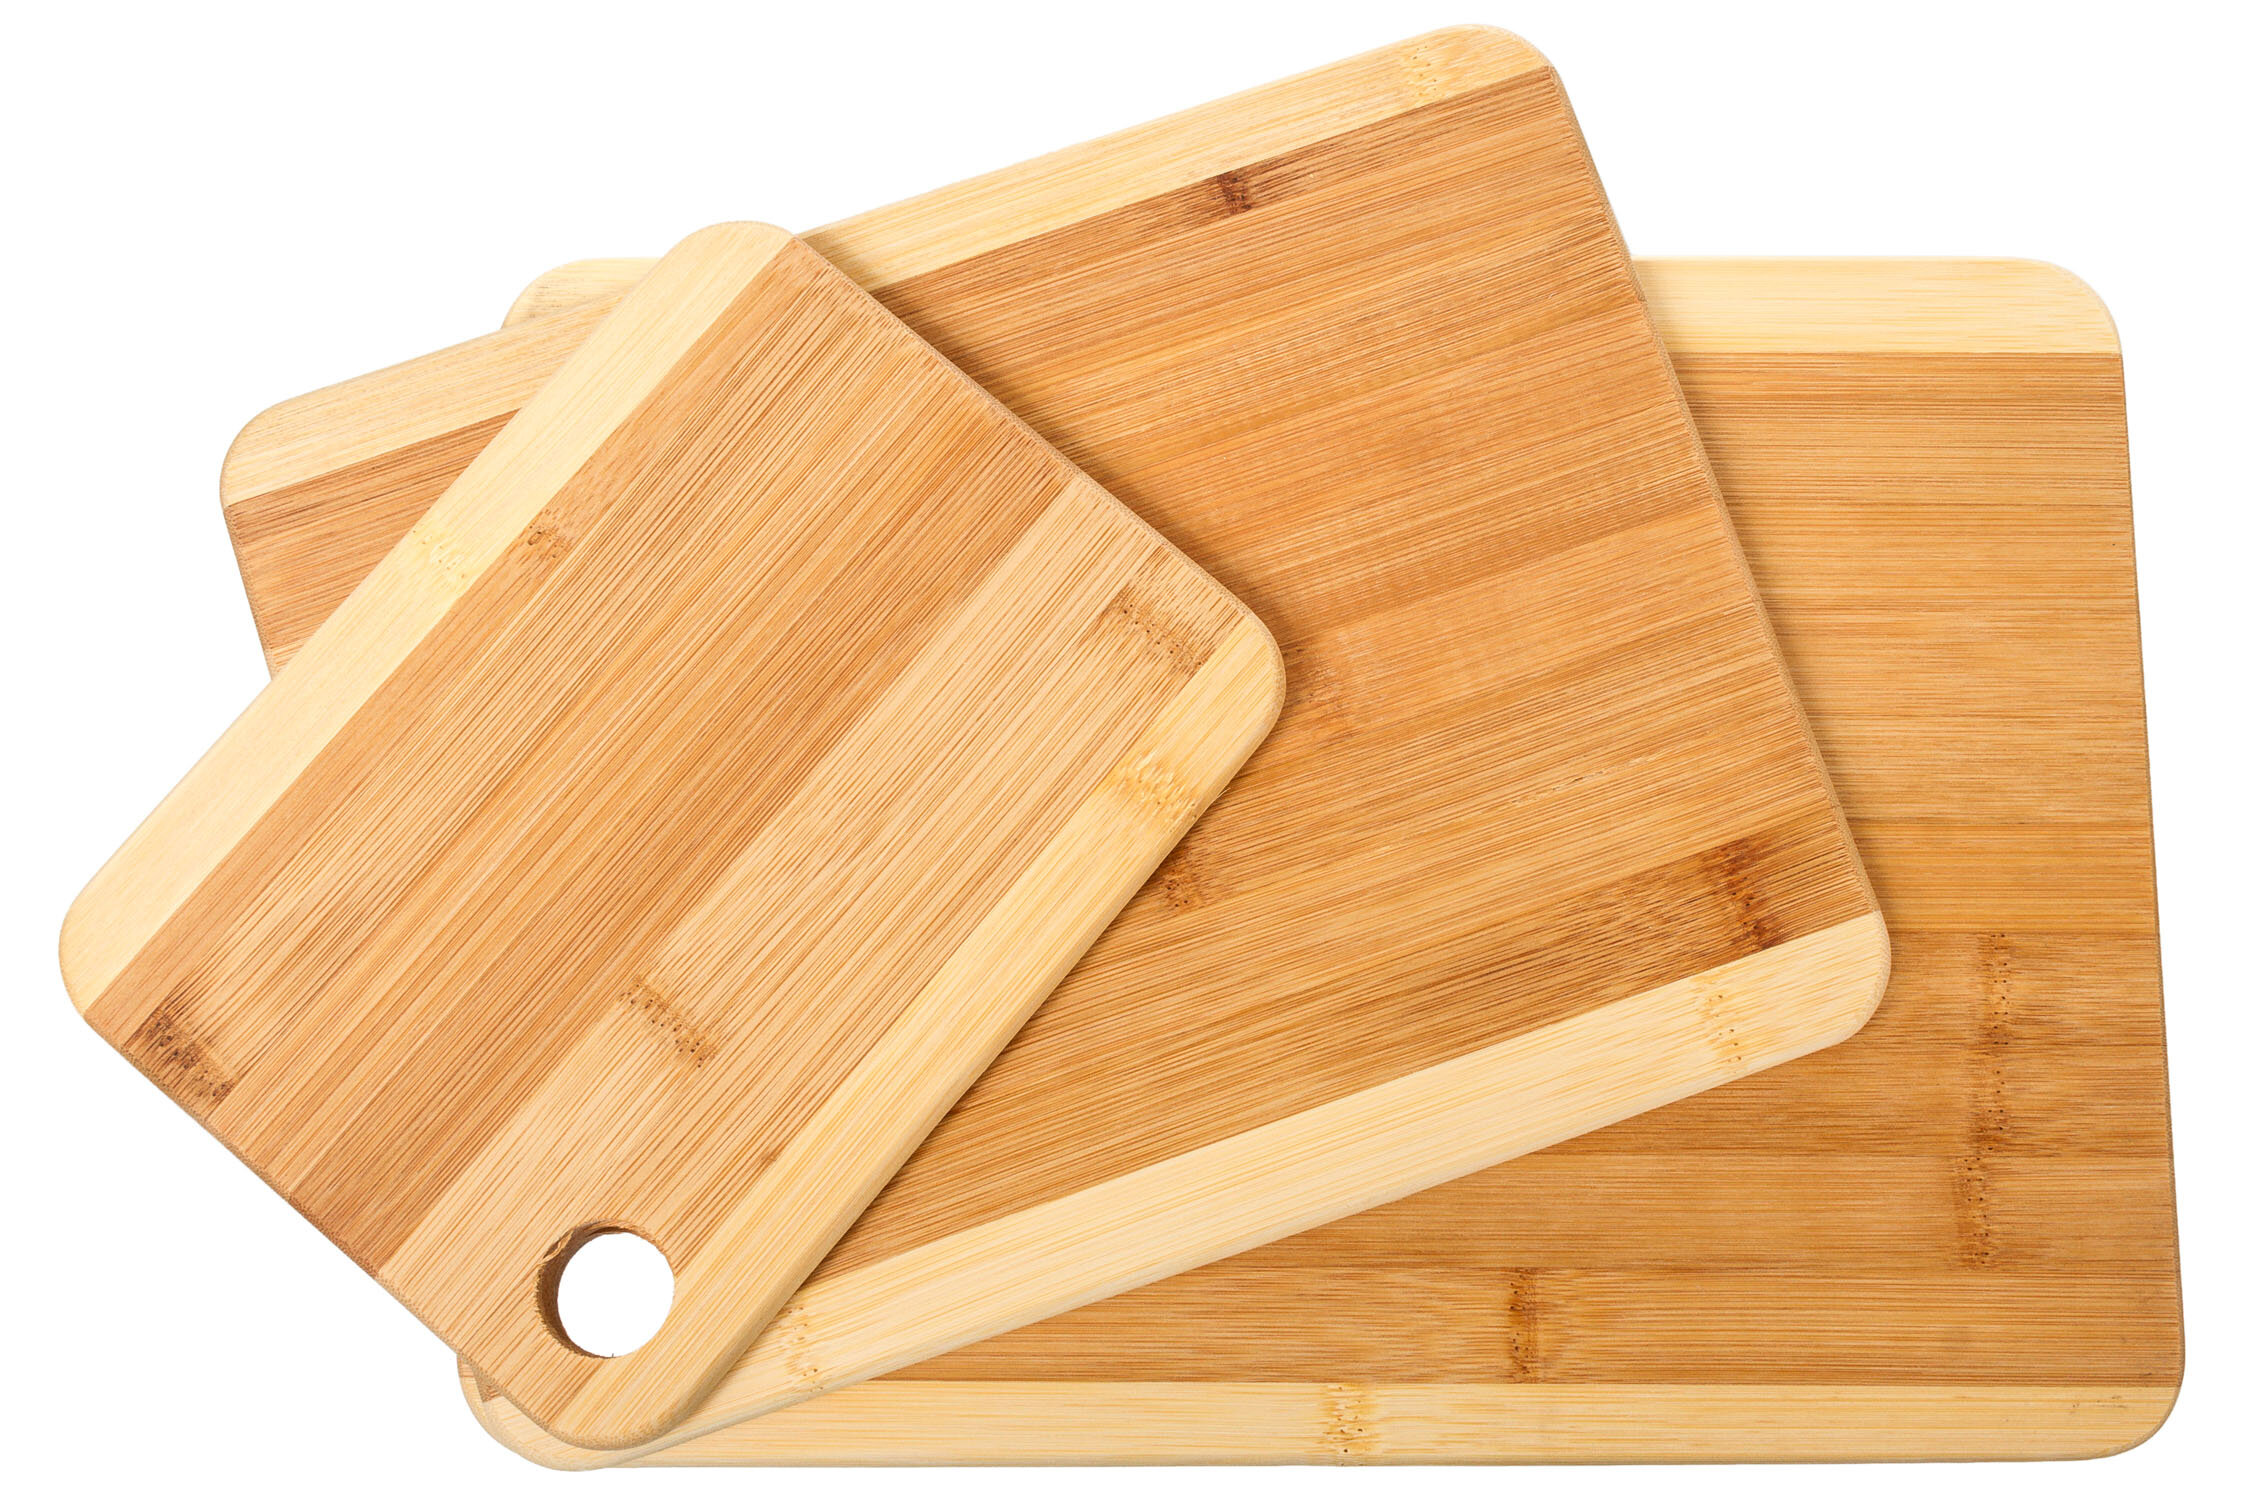 Imperial Home 3 Piece Bamboo Cutting Boards Set Reviews Wayfair